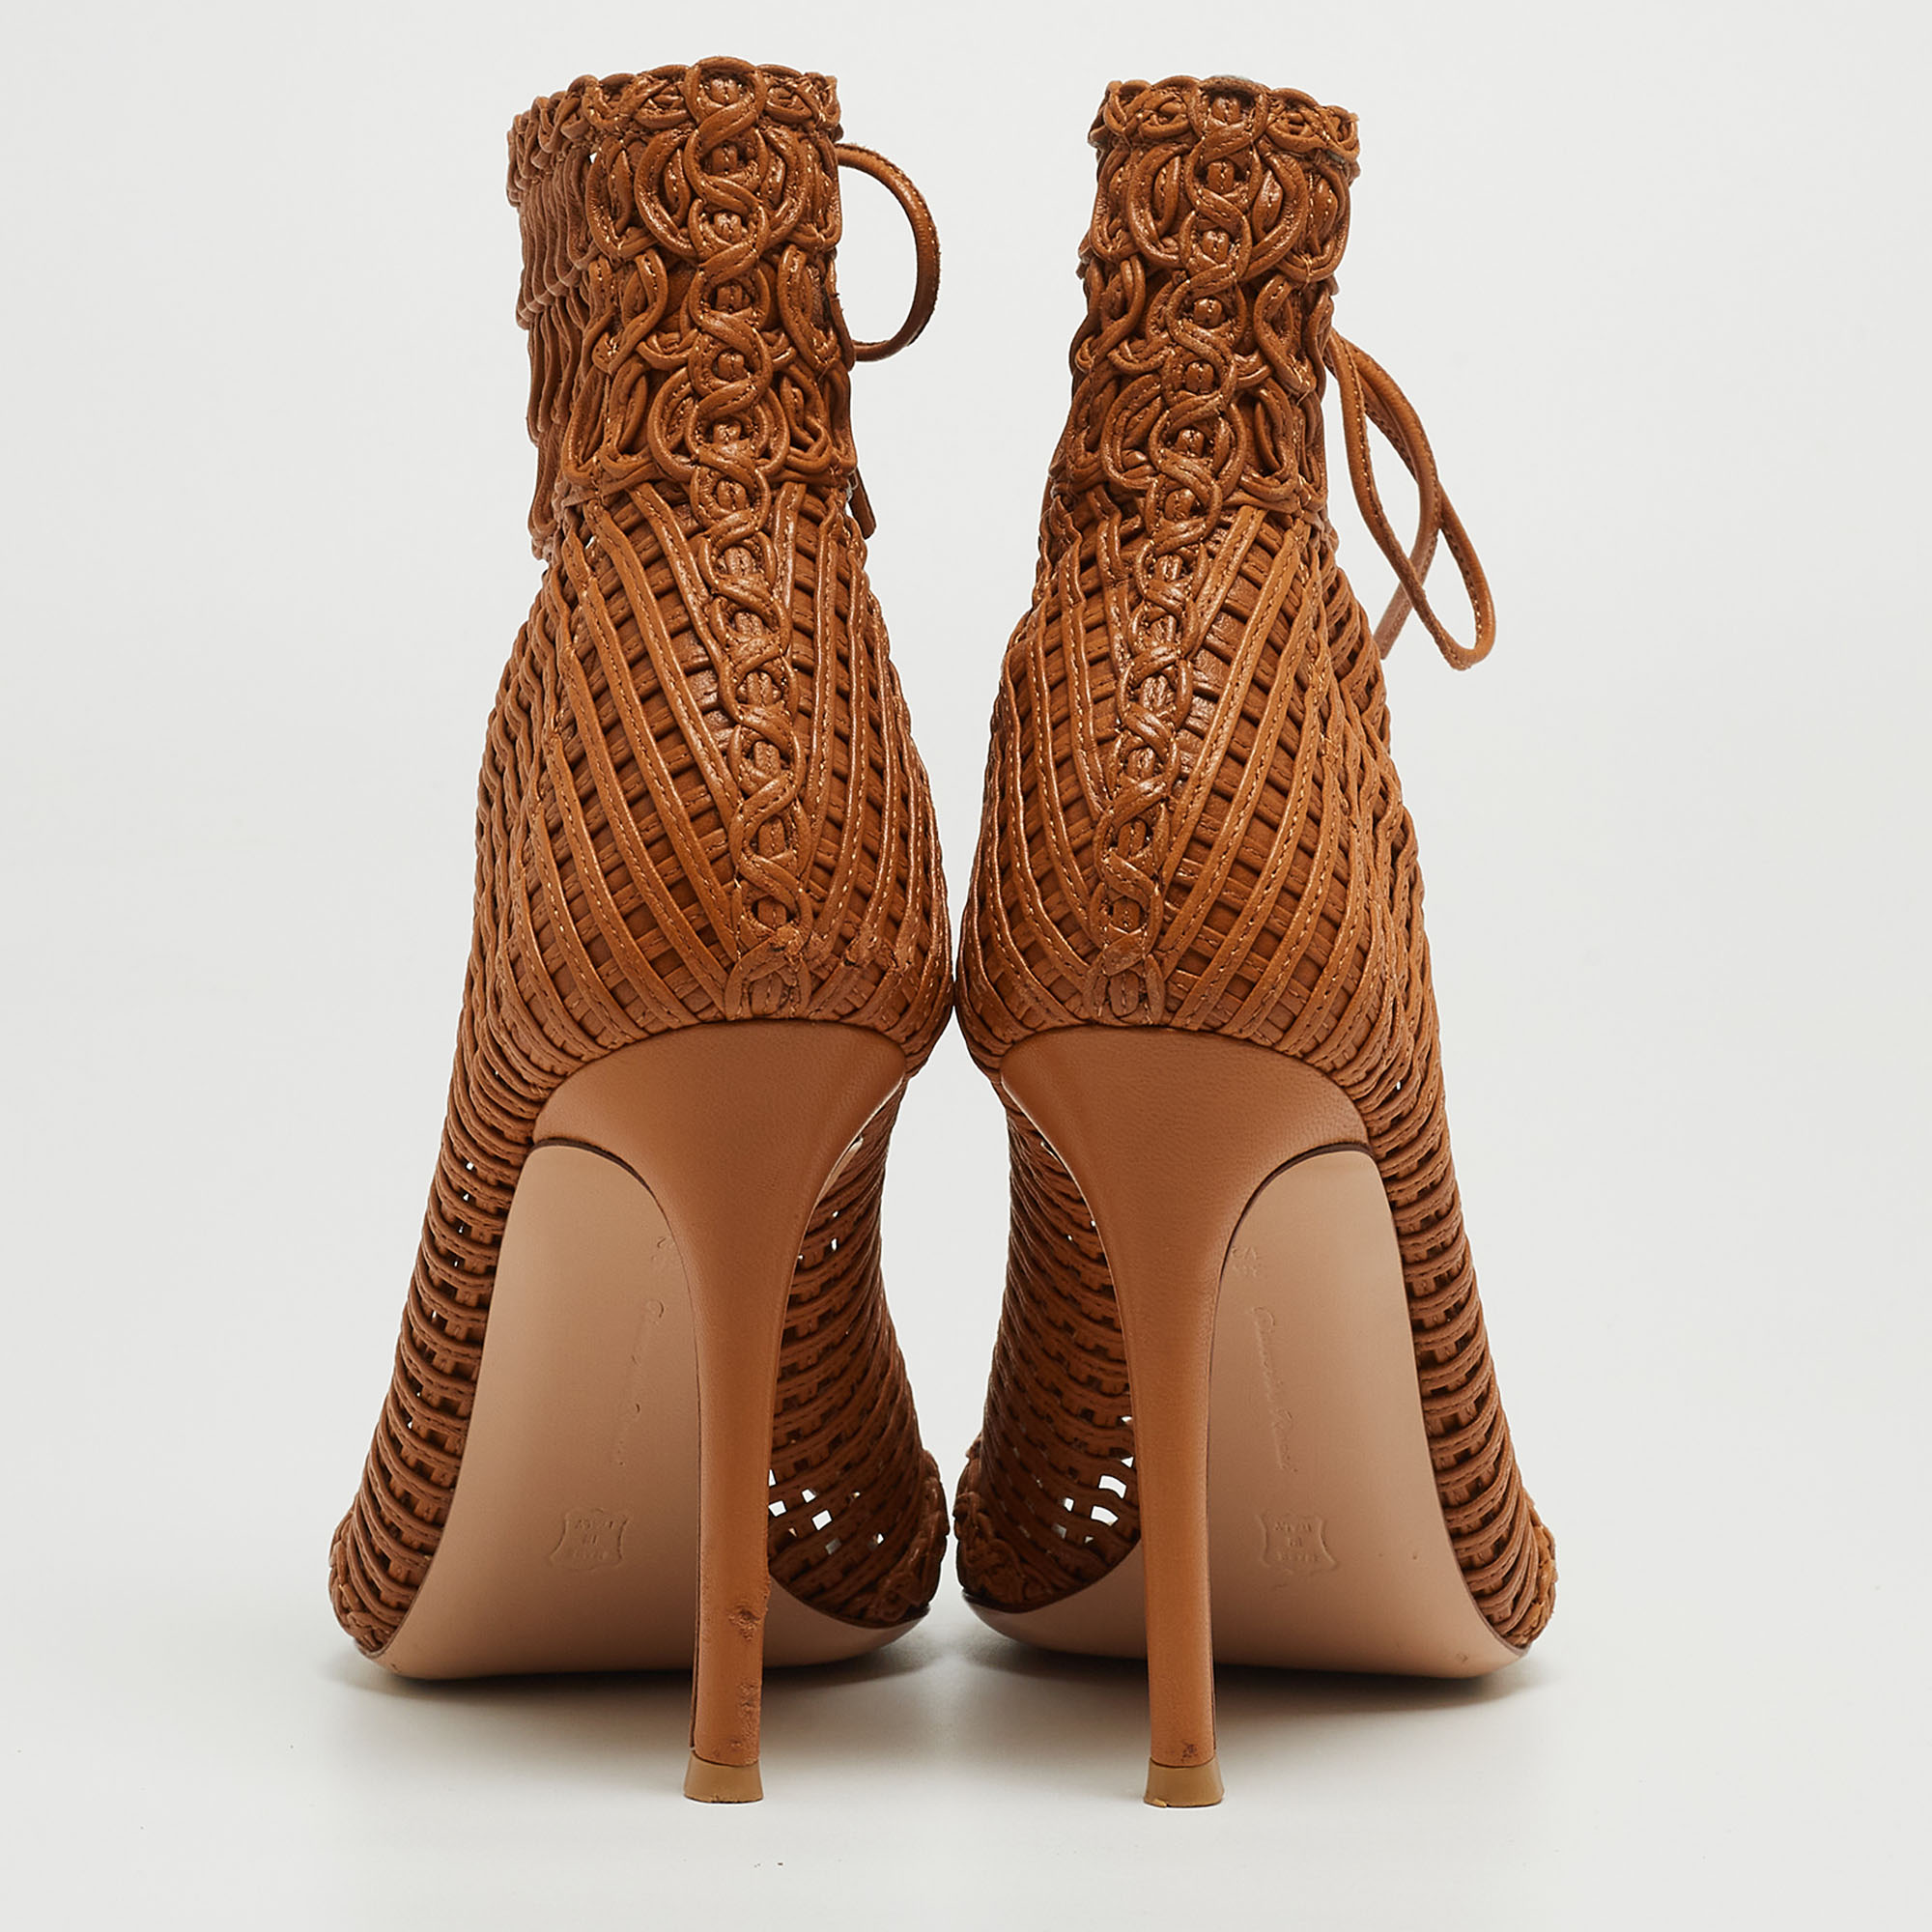 Gianvito Rossi Tan Woven Leather Marnie Ankle Booties Size 36.5